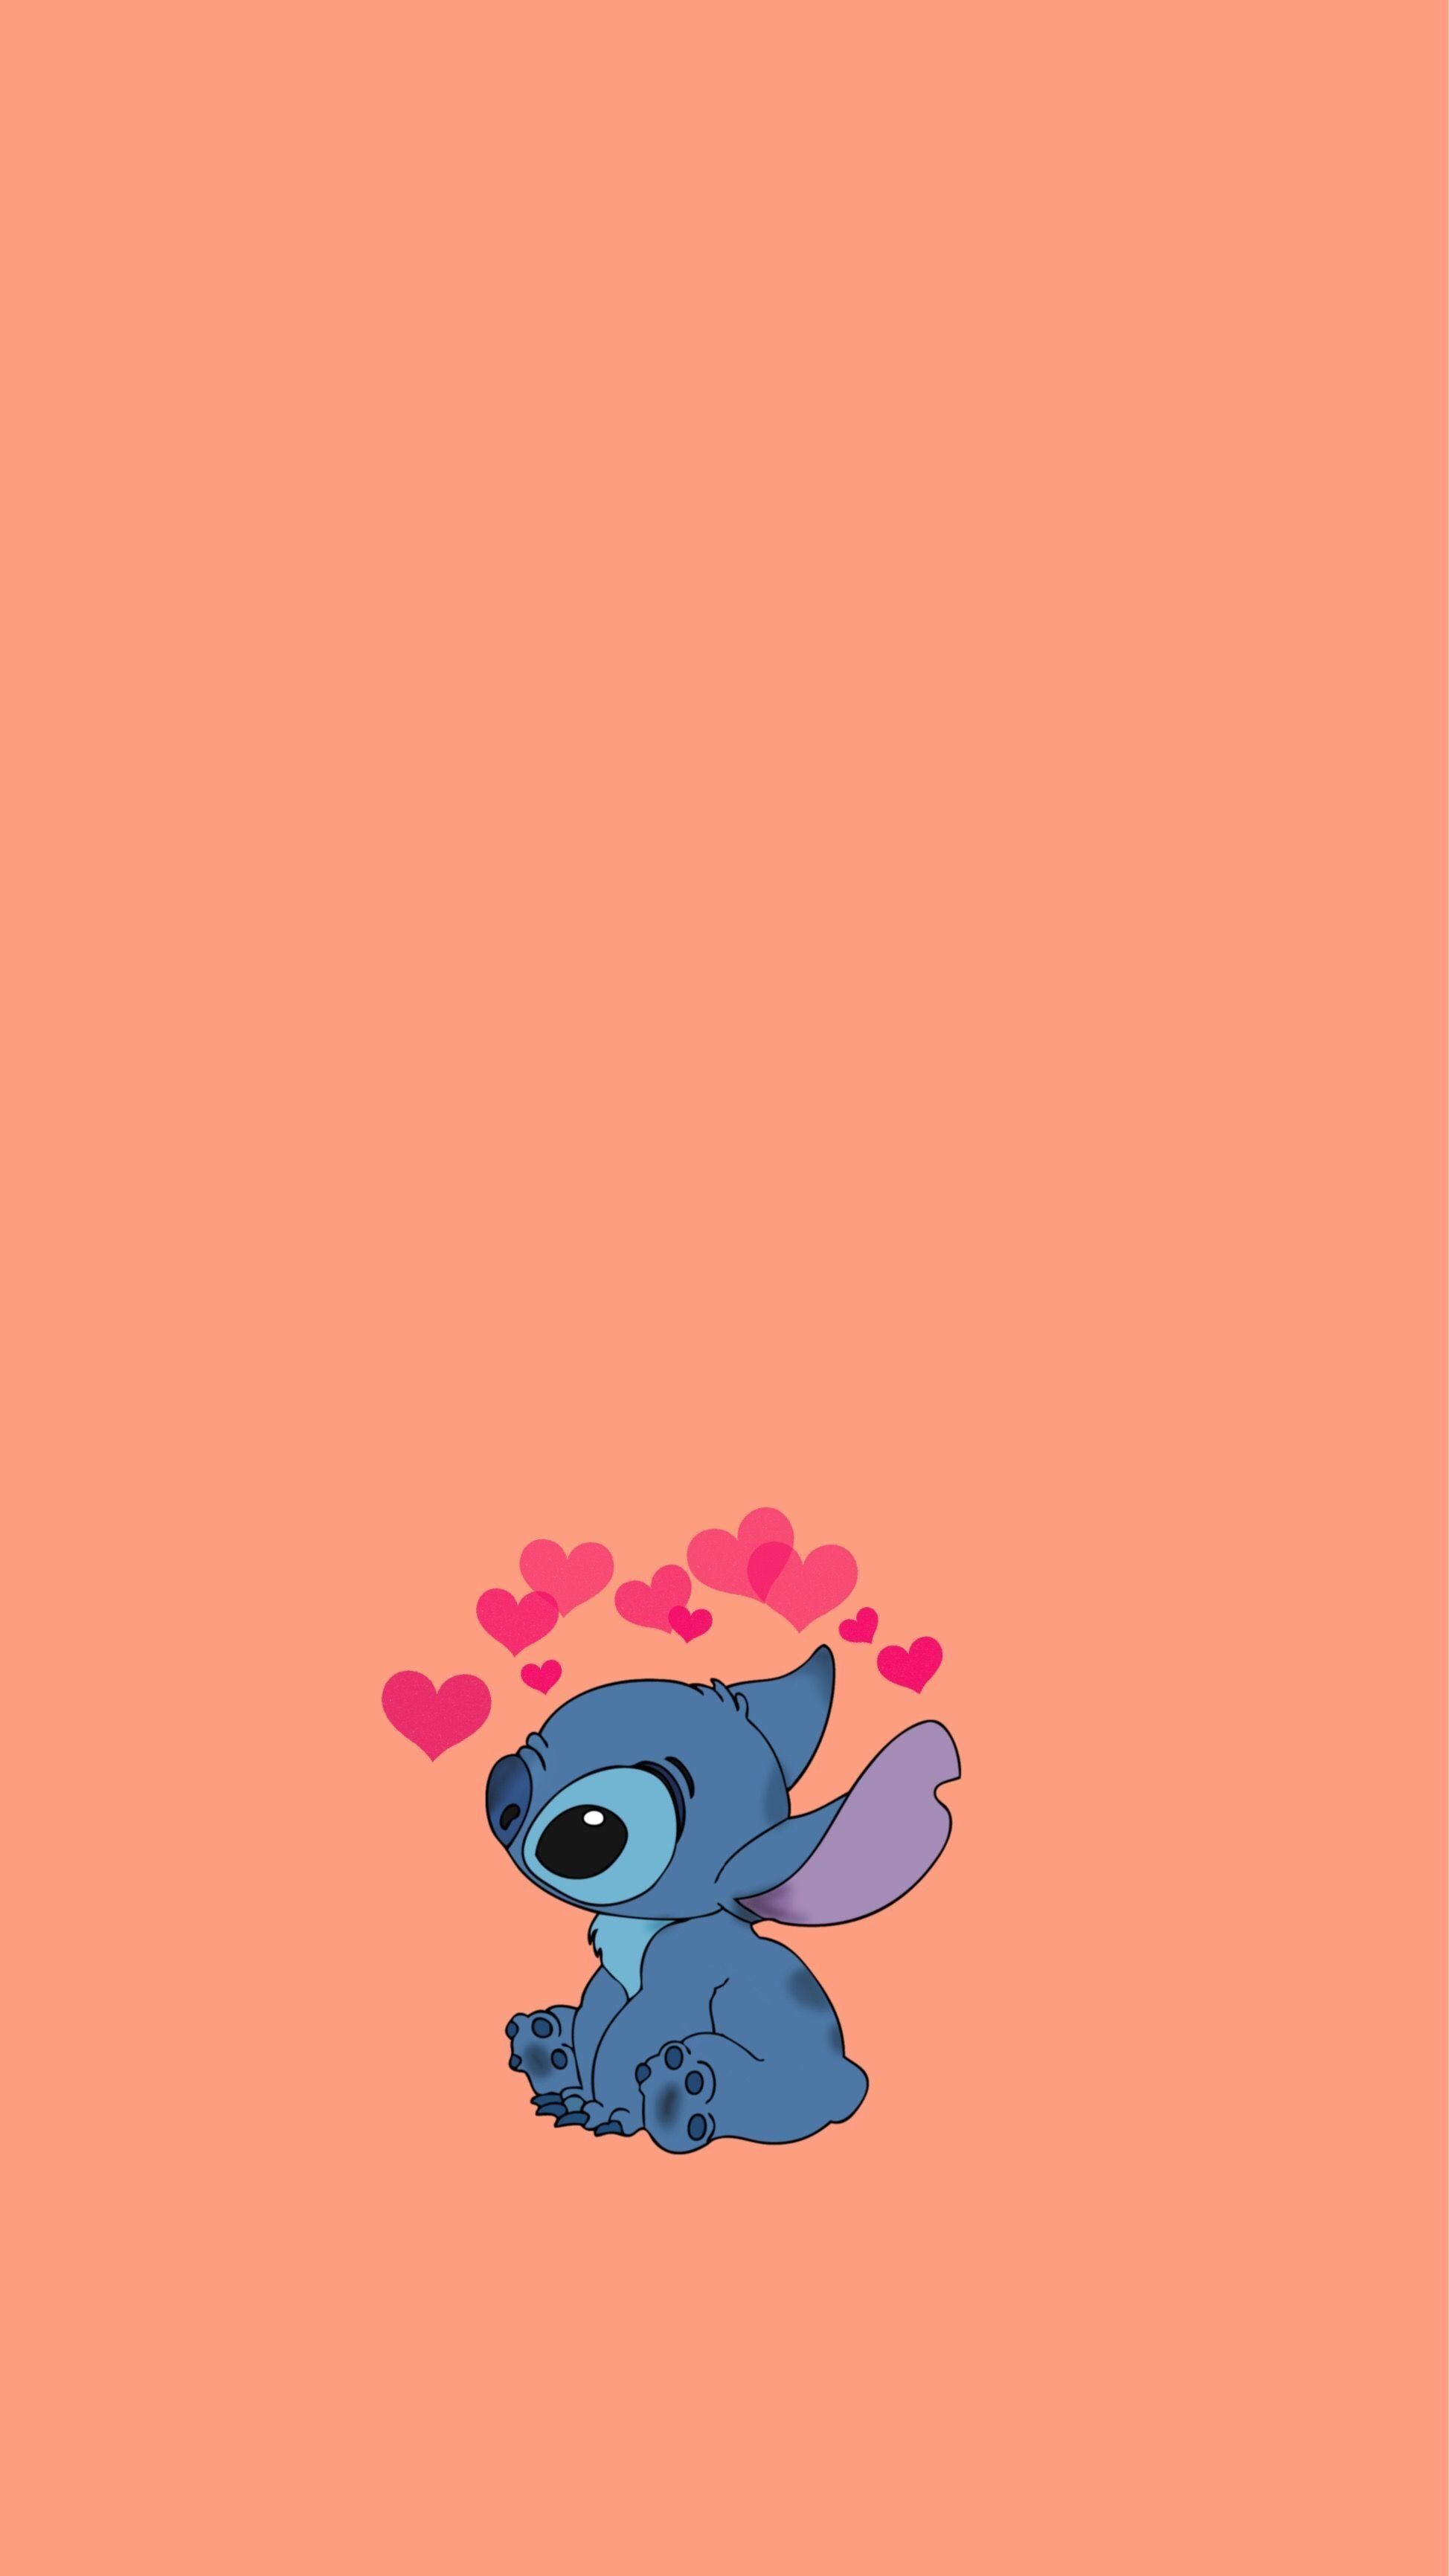 Aesthetic Stitch Disney Wallpapers